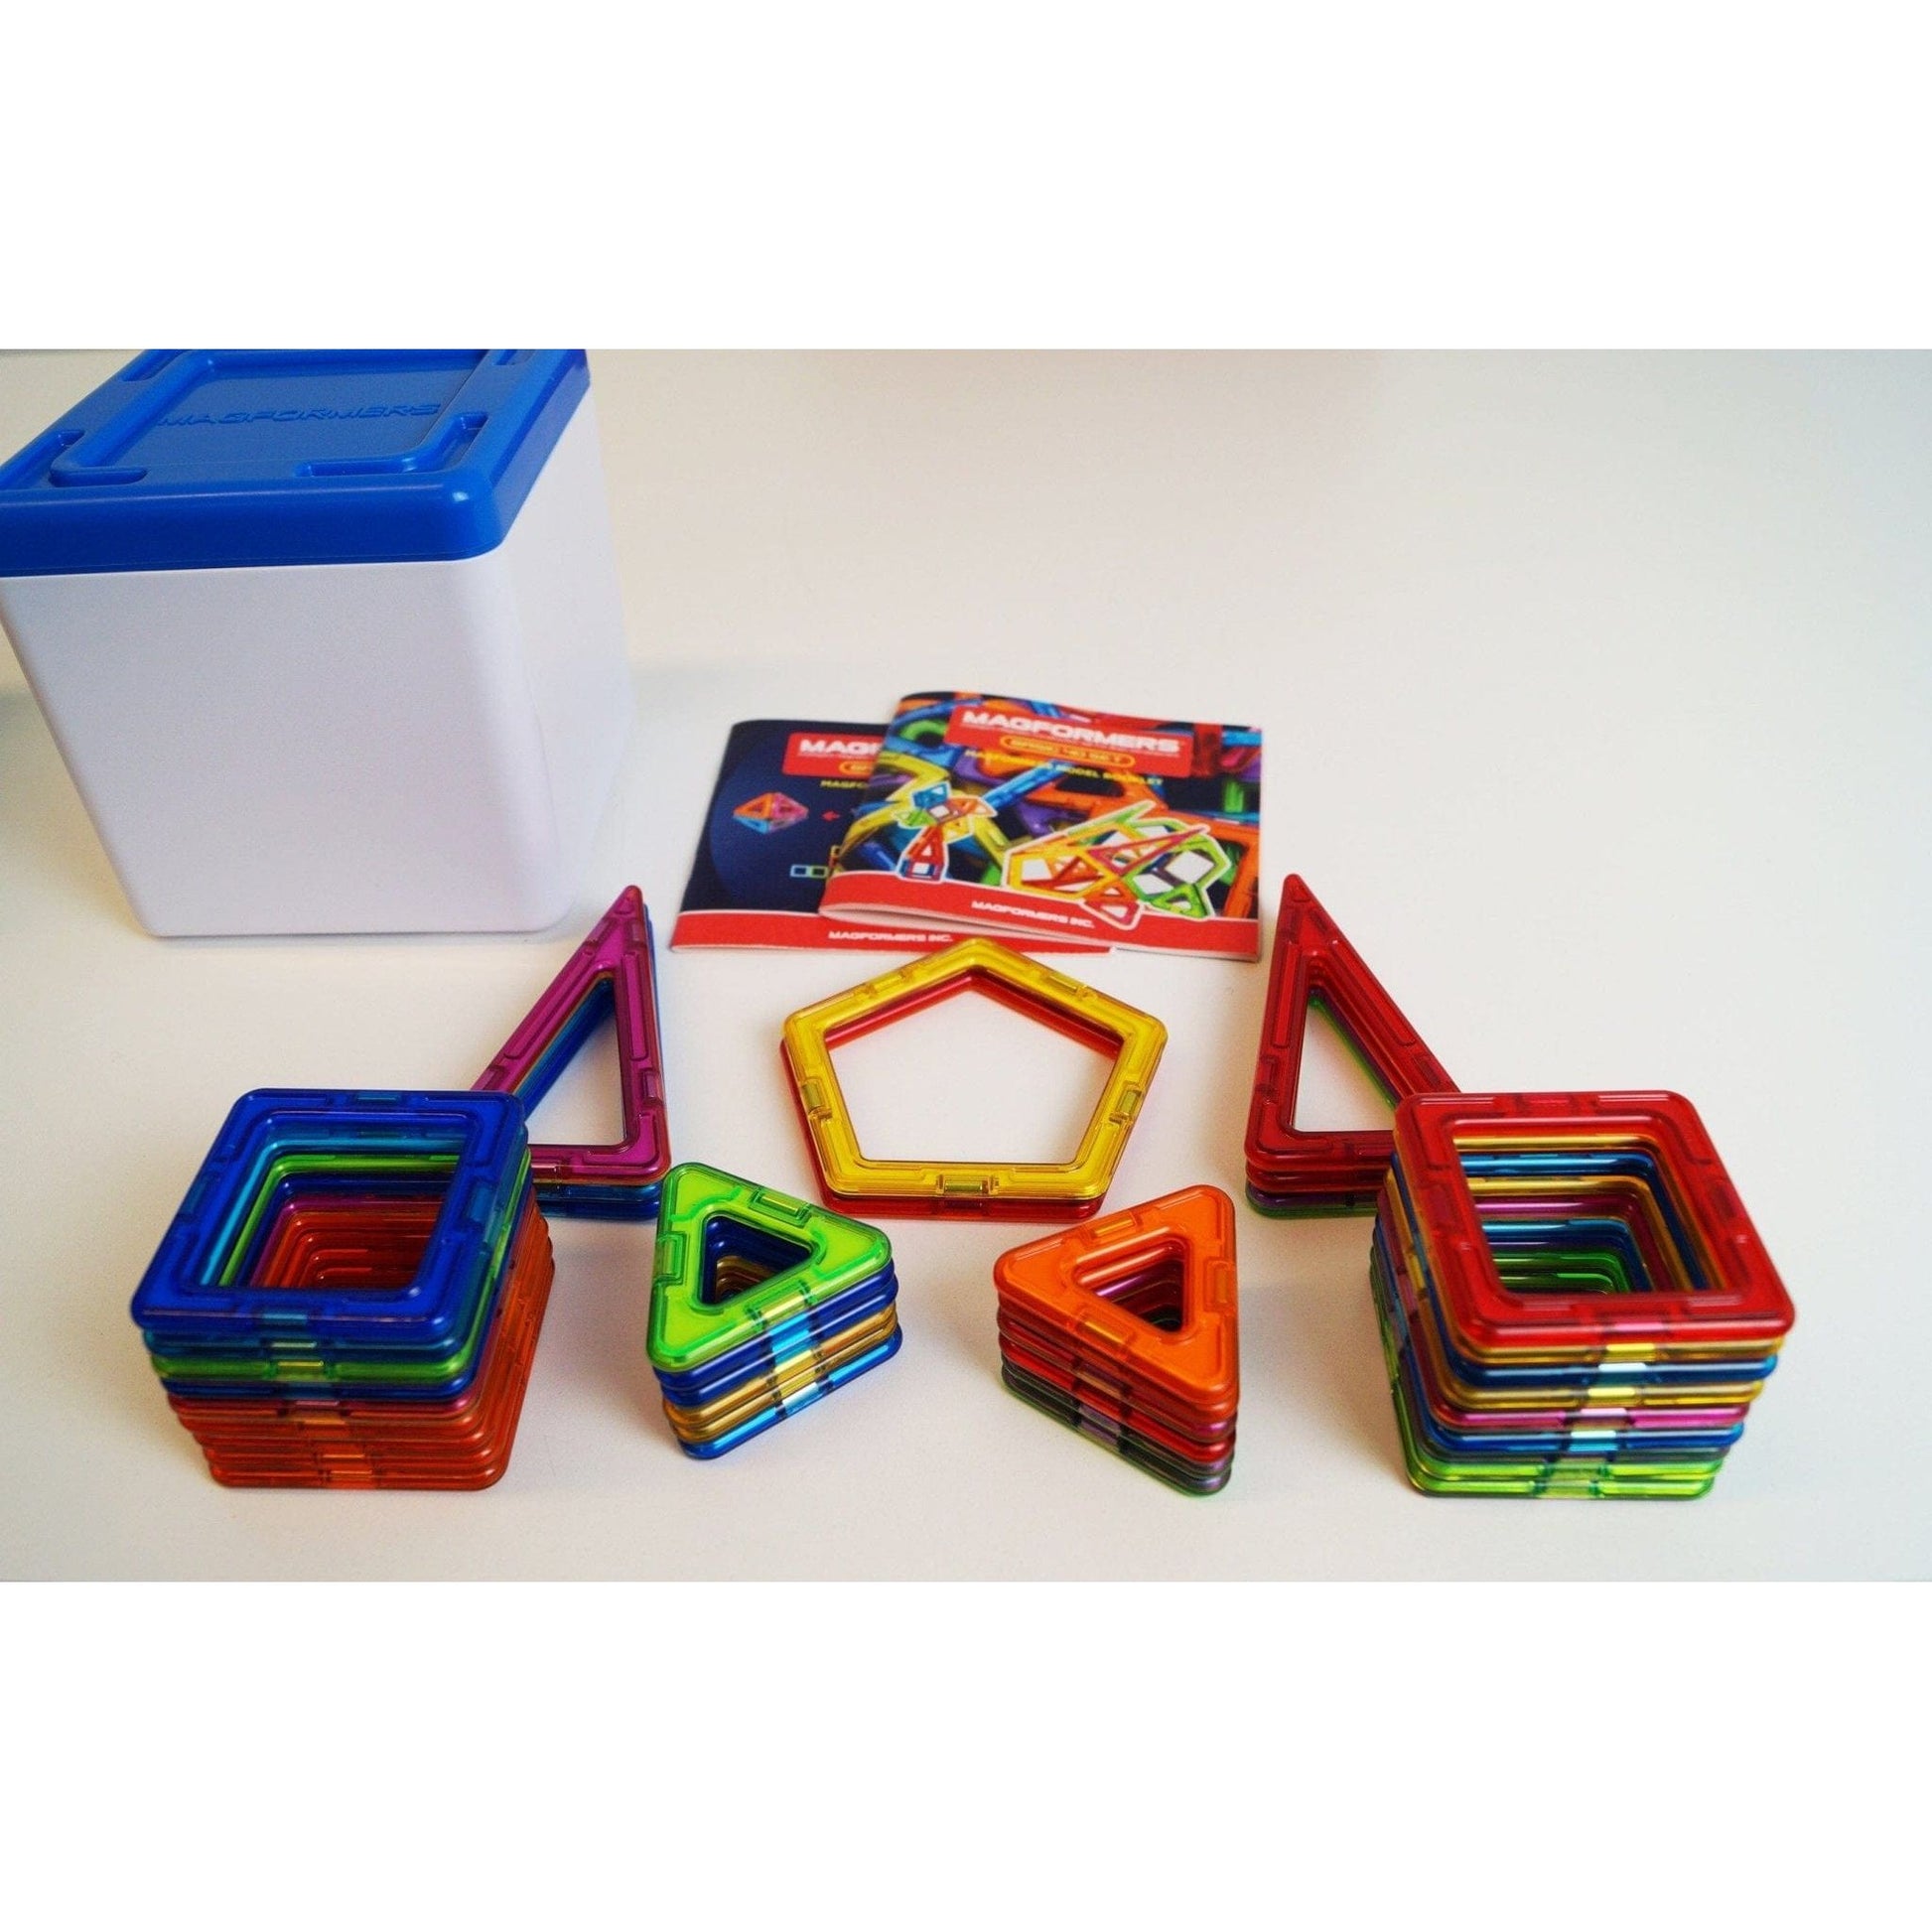 Magformers Construction Toys Basic 42 Piece Set + Storage Box pieces stacked on tabletop